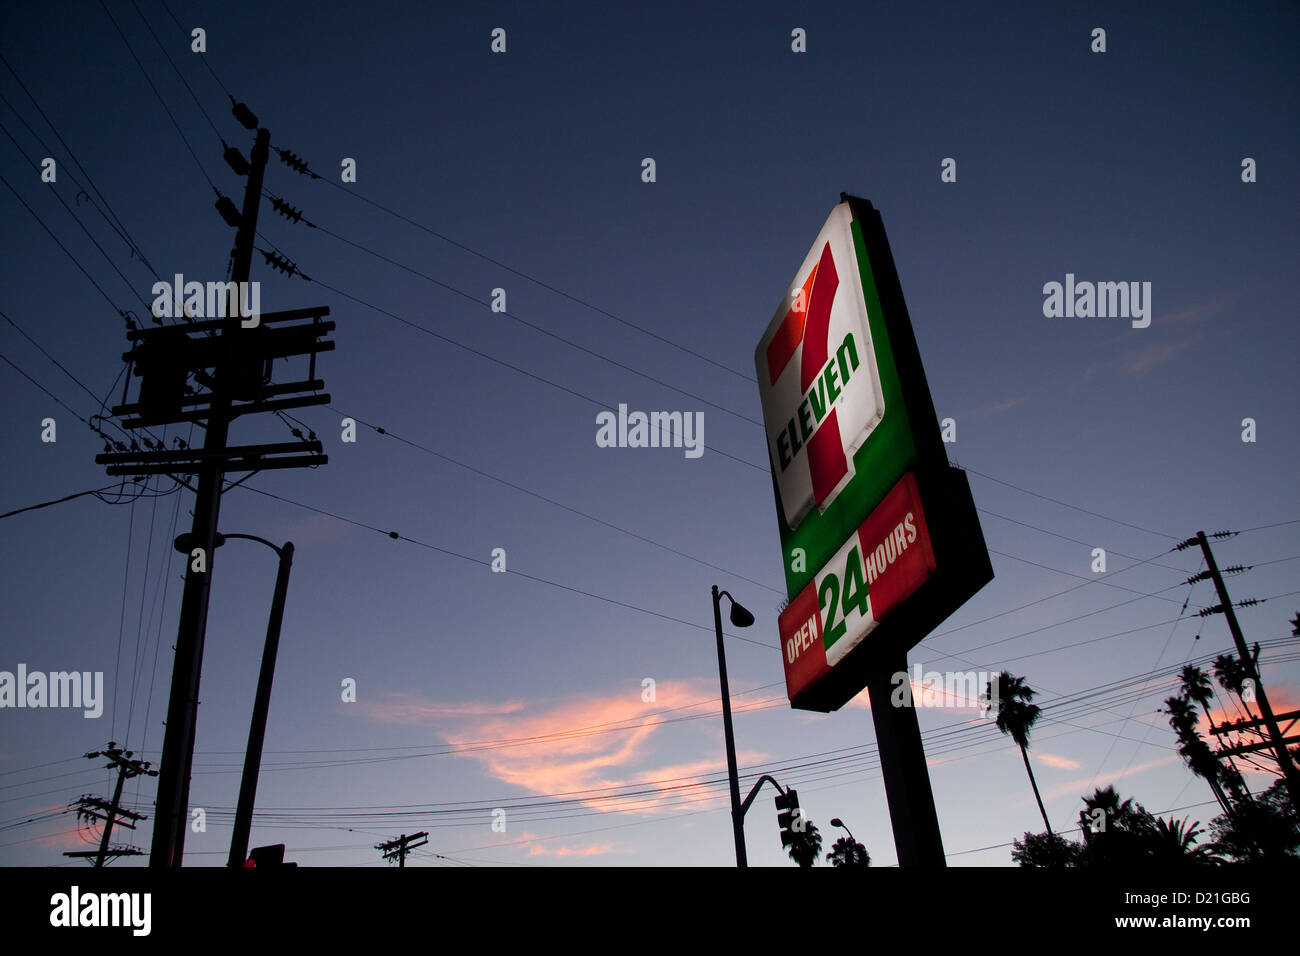 7-11 Convenient Store Sign, Telephone poles against sunset sky Stock Photo